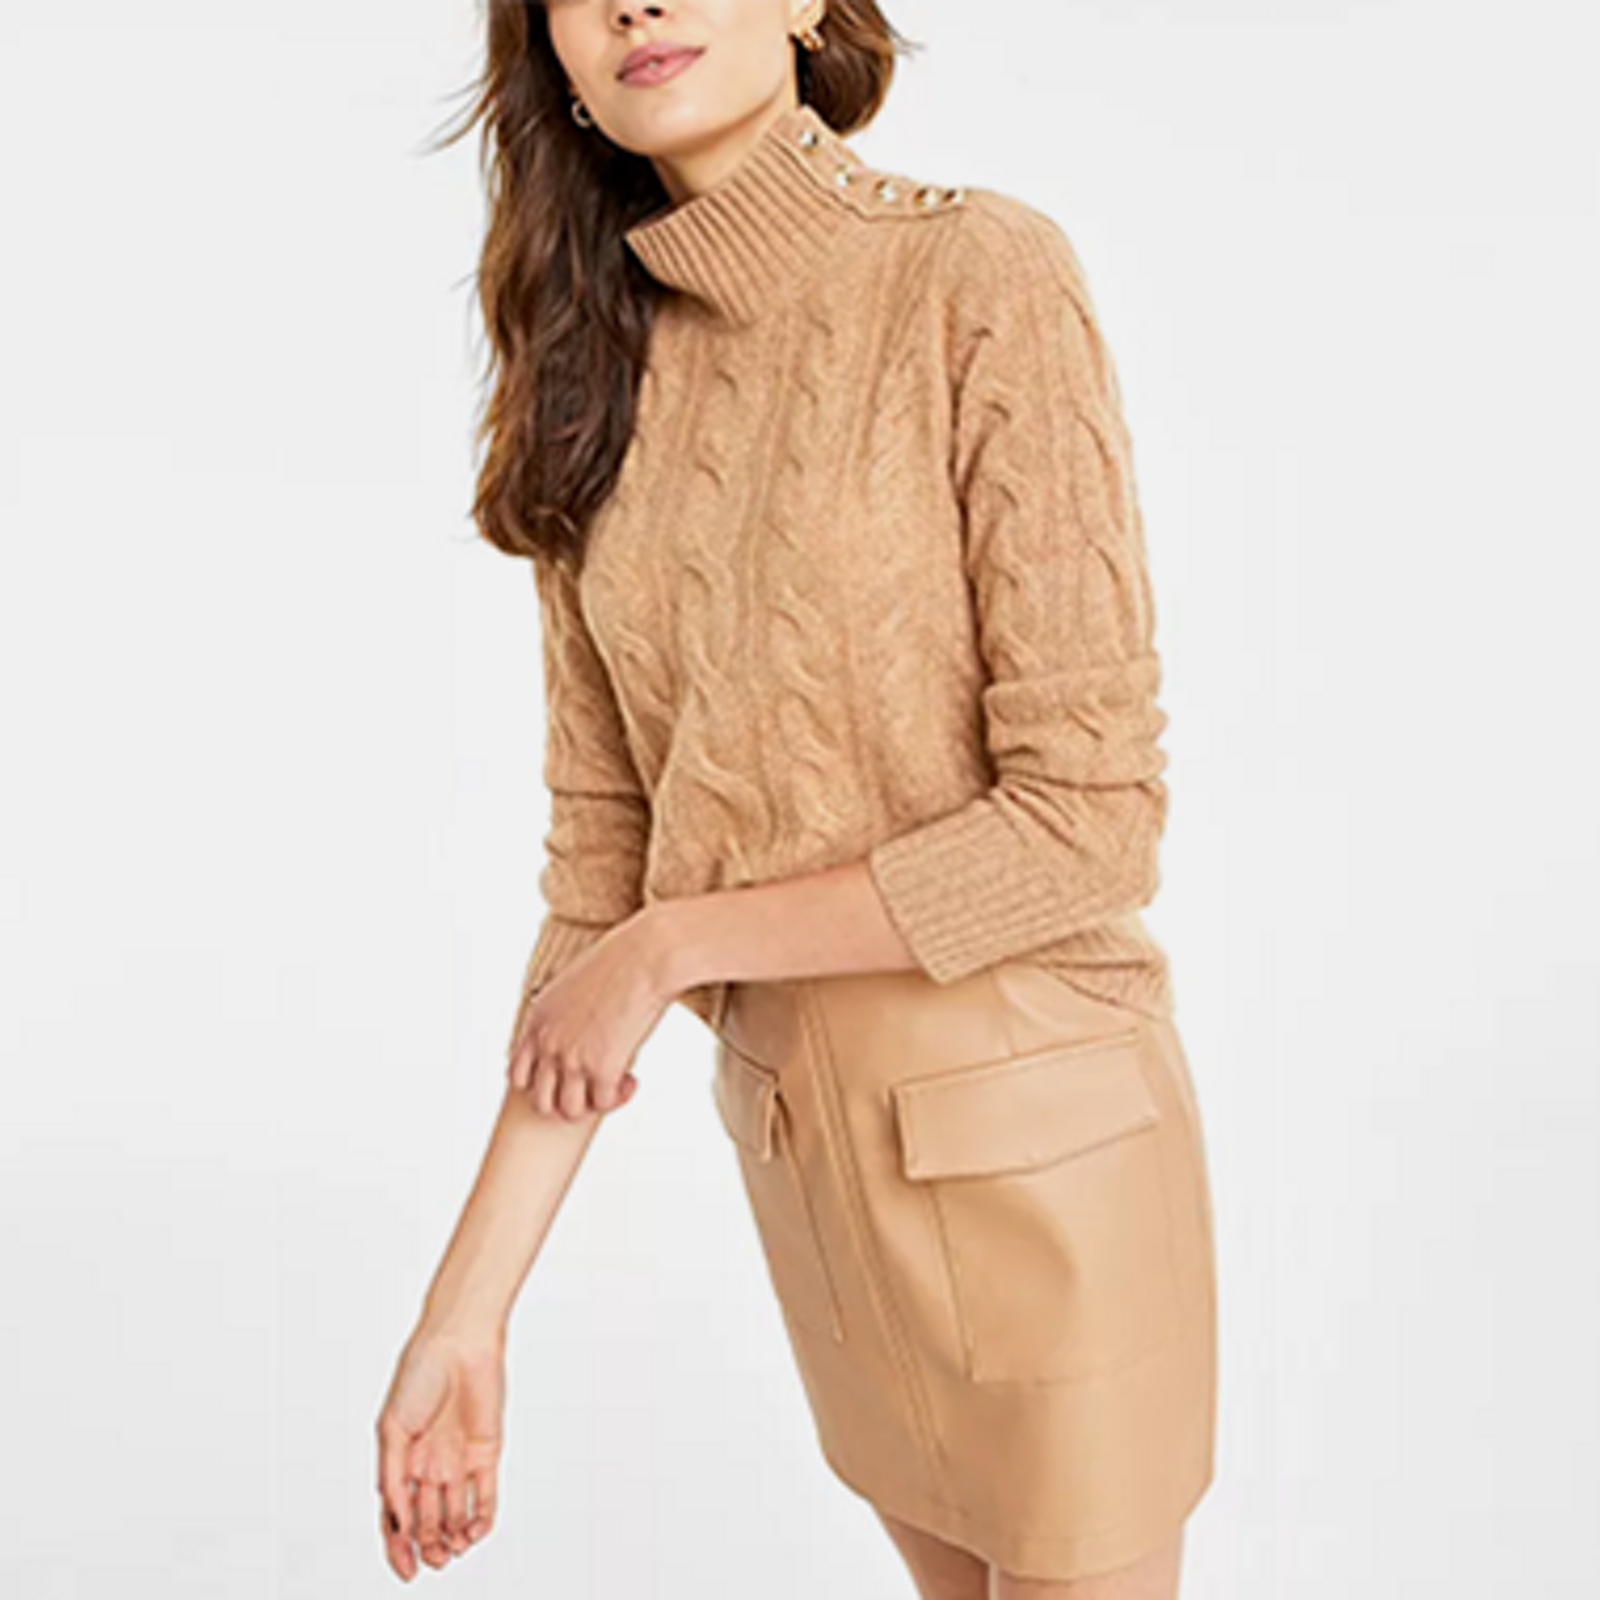 Women's Clothing Sale & Clearance - Macy's